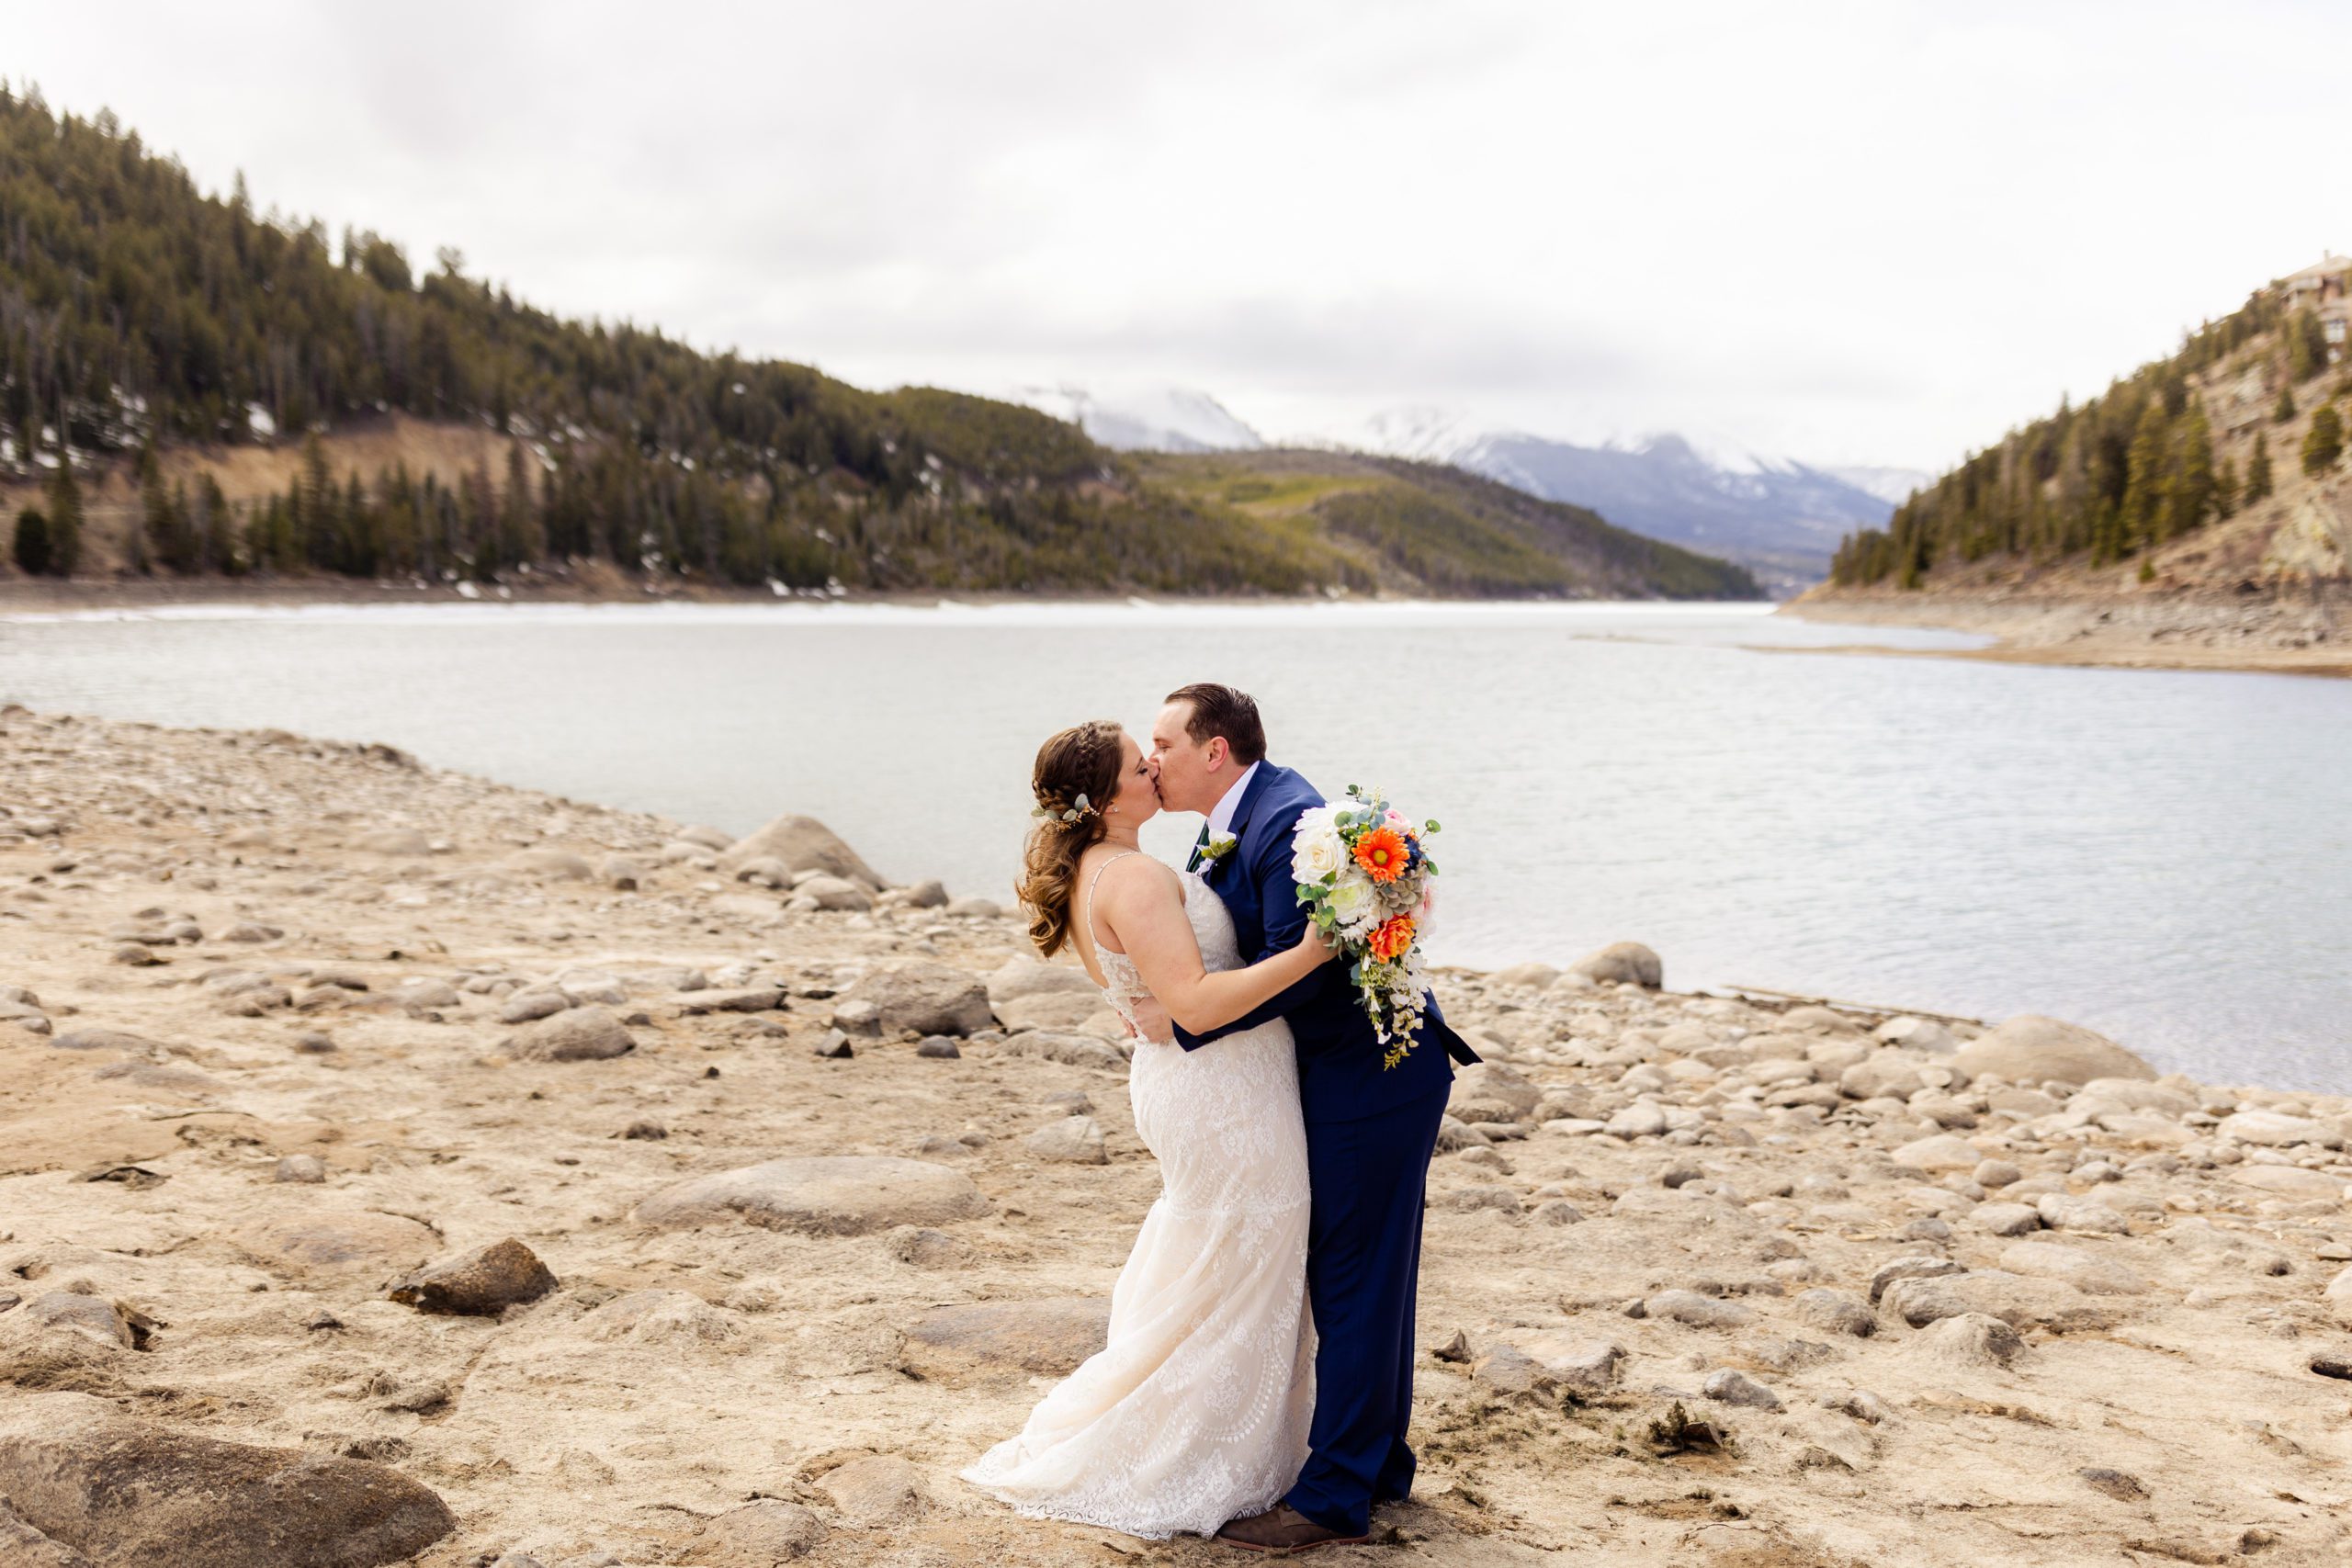 The groom kisses his bride at their Sapphire Point Elopement.